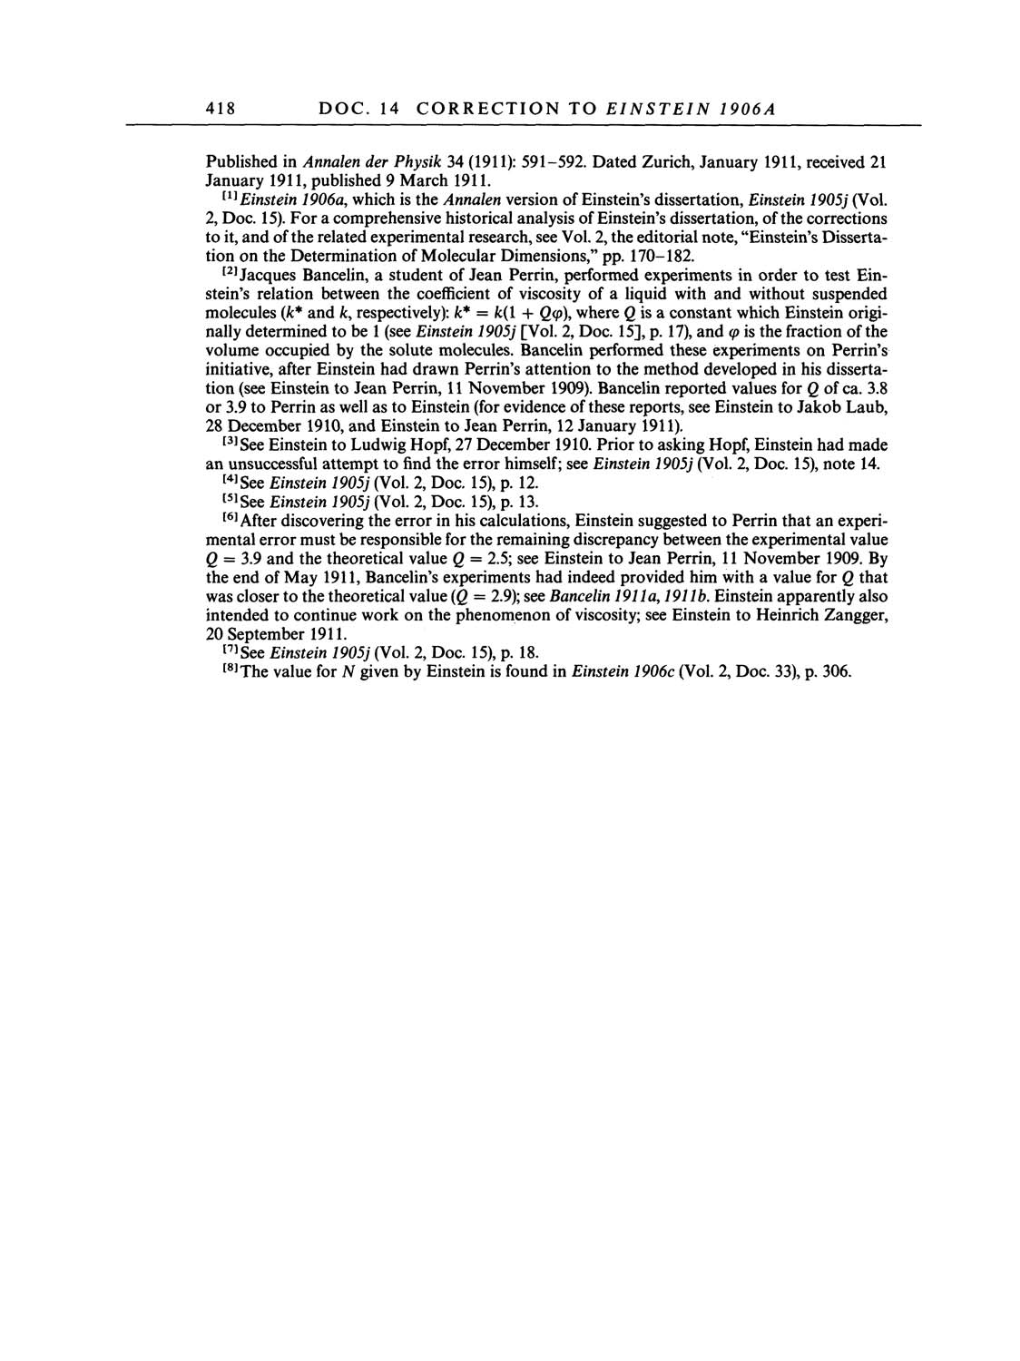 Volume 3: The Swiss Years: Writings 1909-1911 page 418